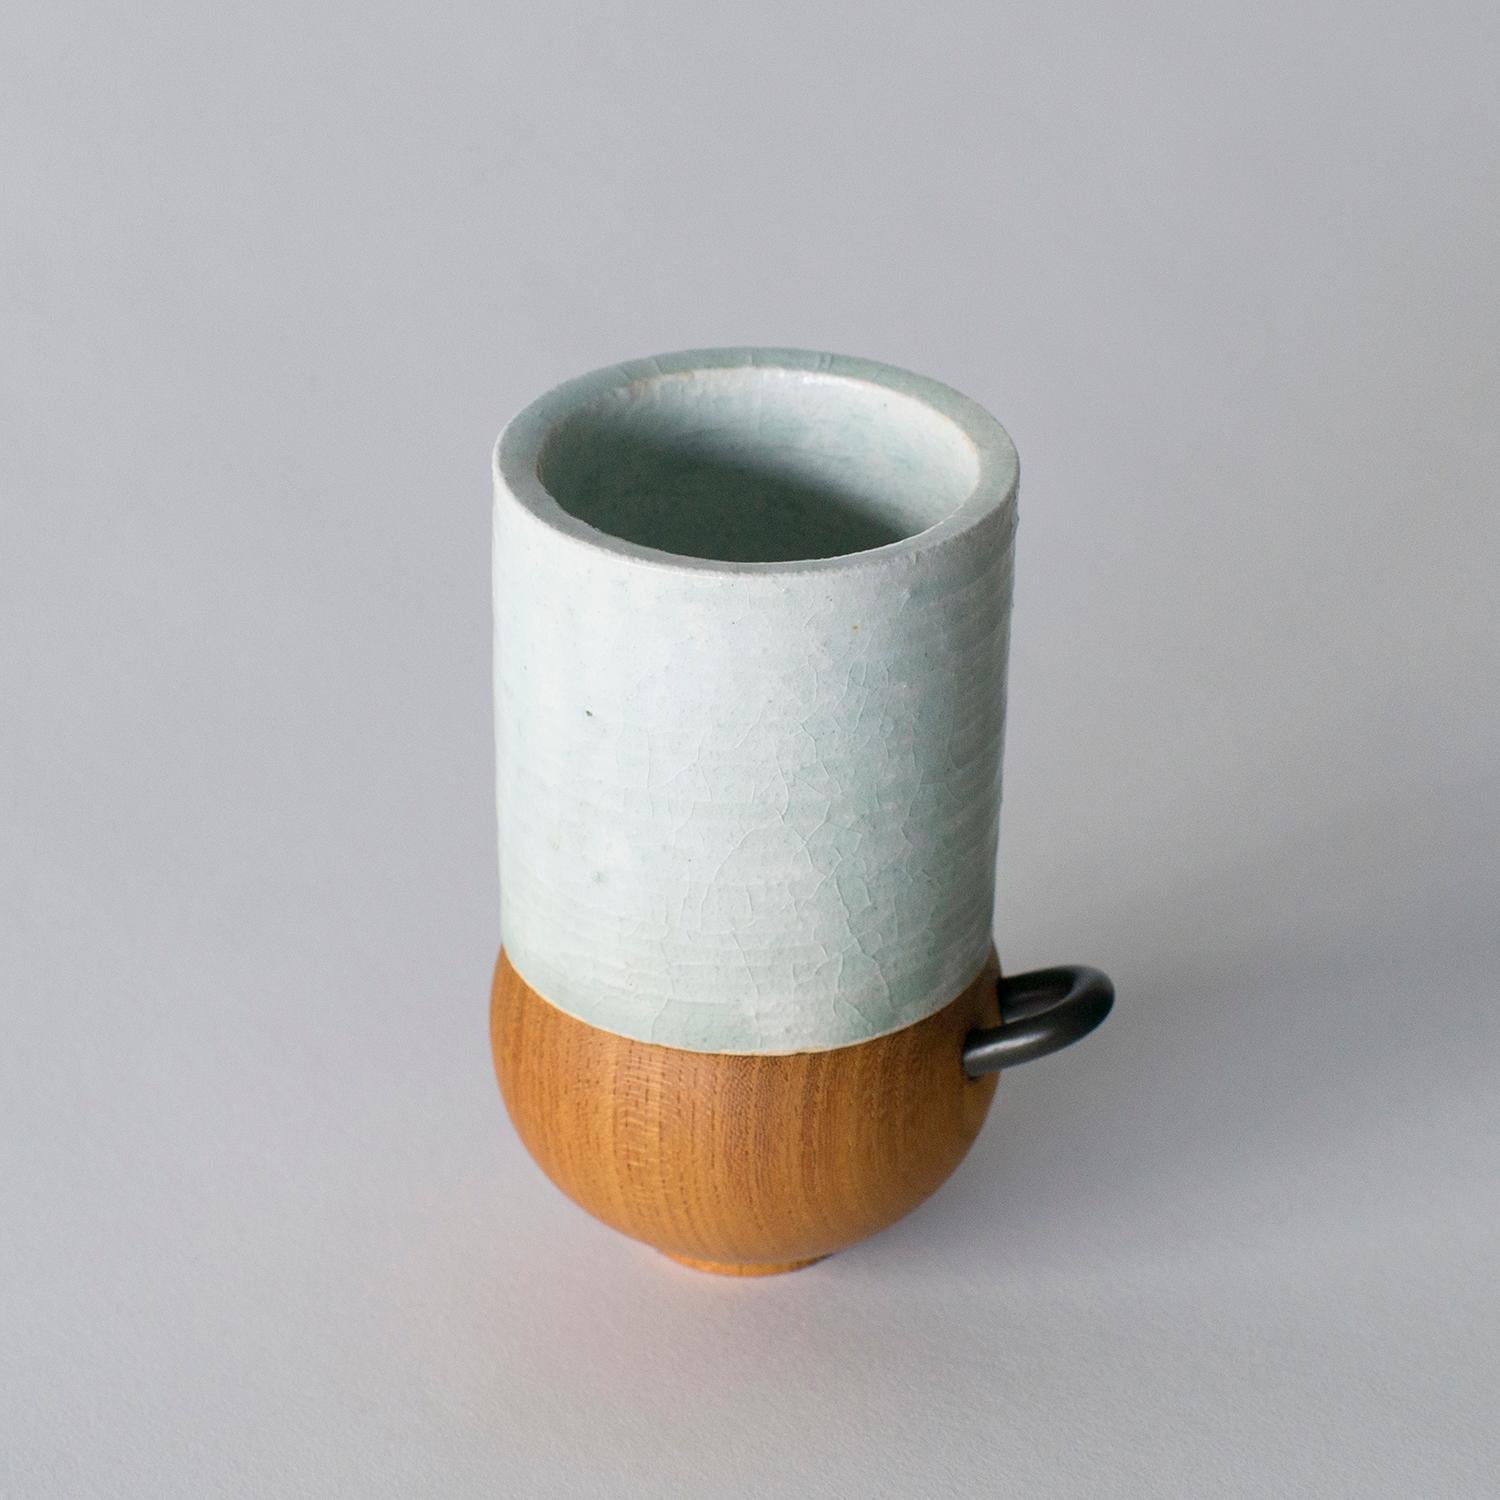 Carved Japanese Style Ceramic Cup Takuya Hamajima Contemporary Zen For Sale